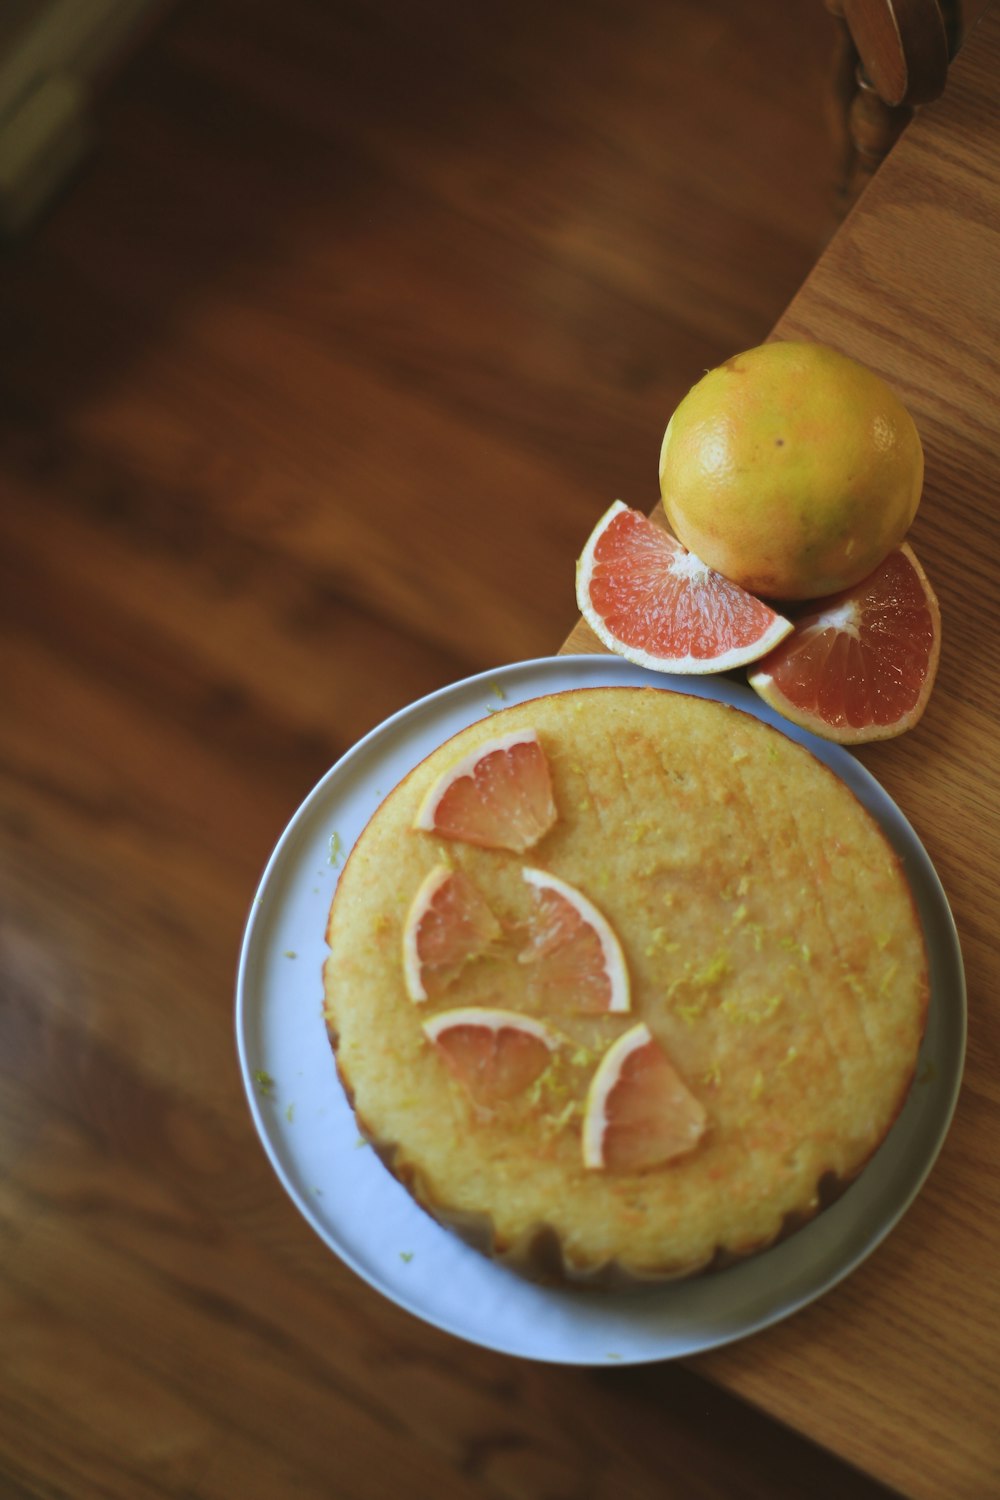 a cake on a plate with oranges and a grapefruit